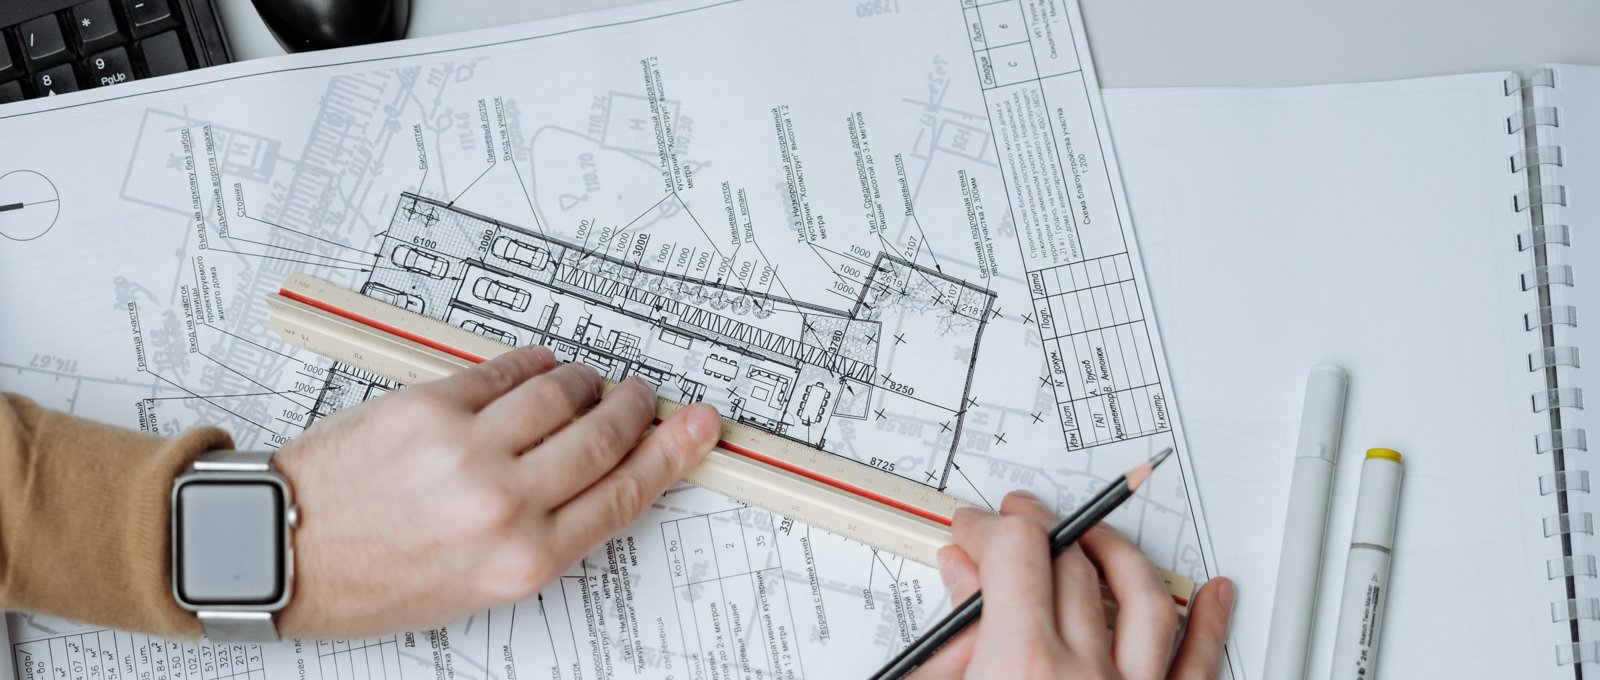 Close up photograph of someone working on architectural blueprints